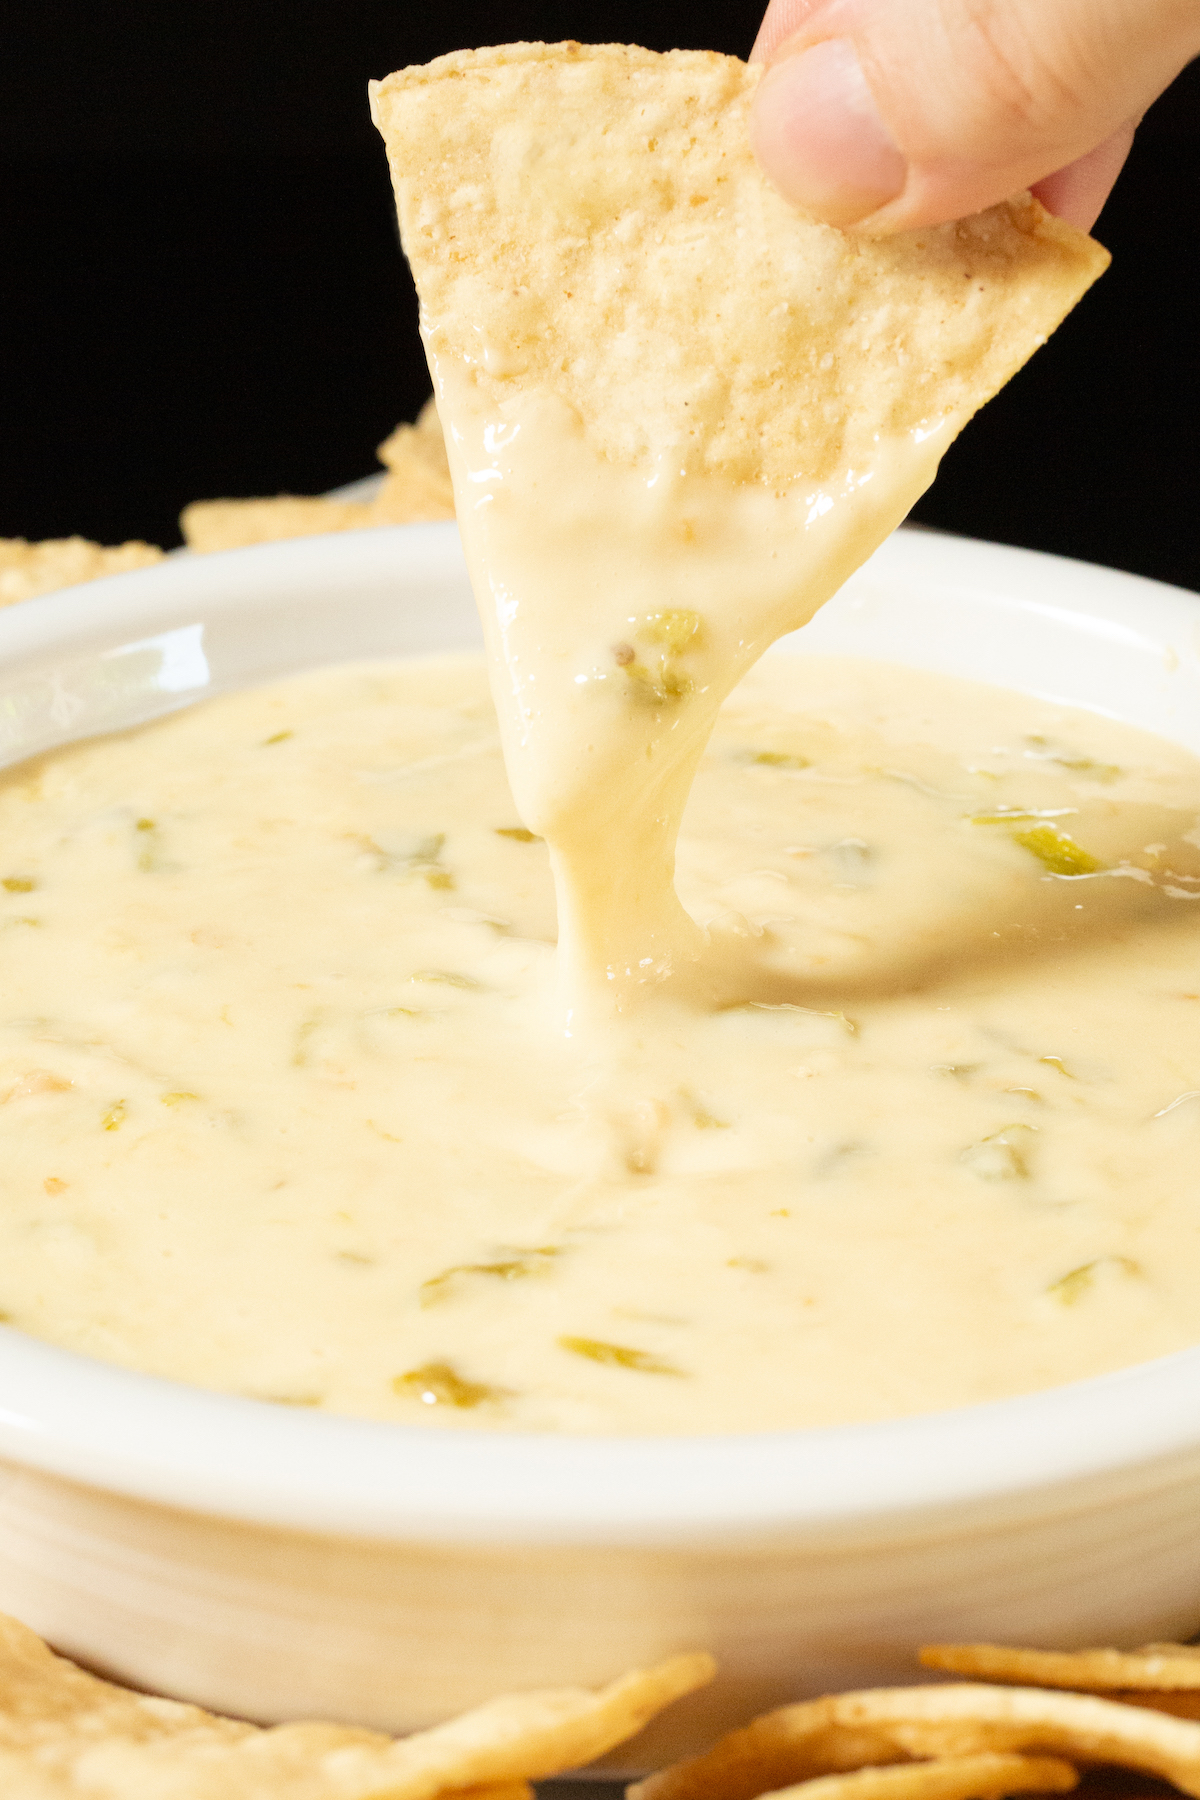 Two fingers pull a tortilla chip up from being dipped in a bowl of hatch chile queso, the cheese dip stretches with the chip.